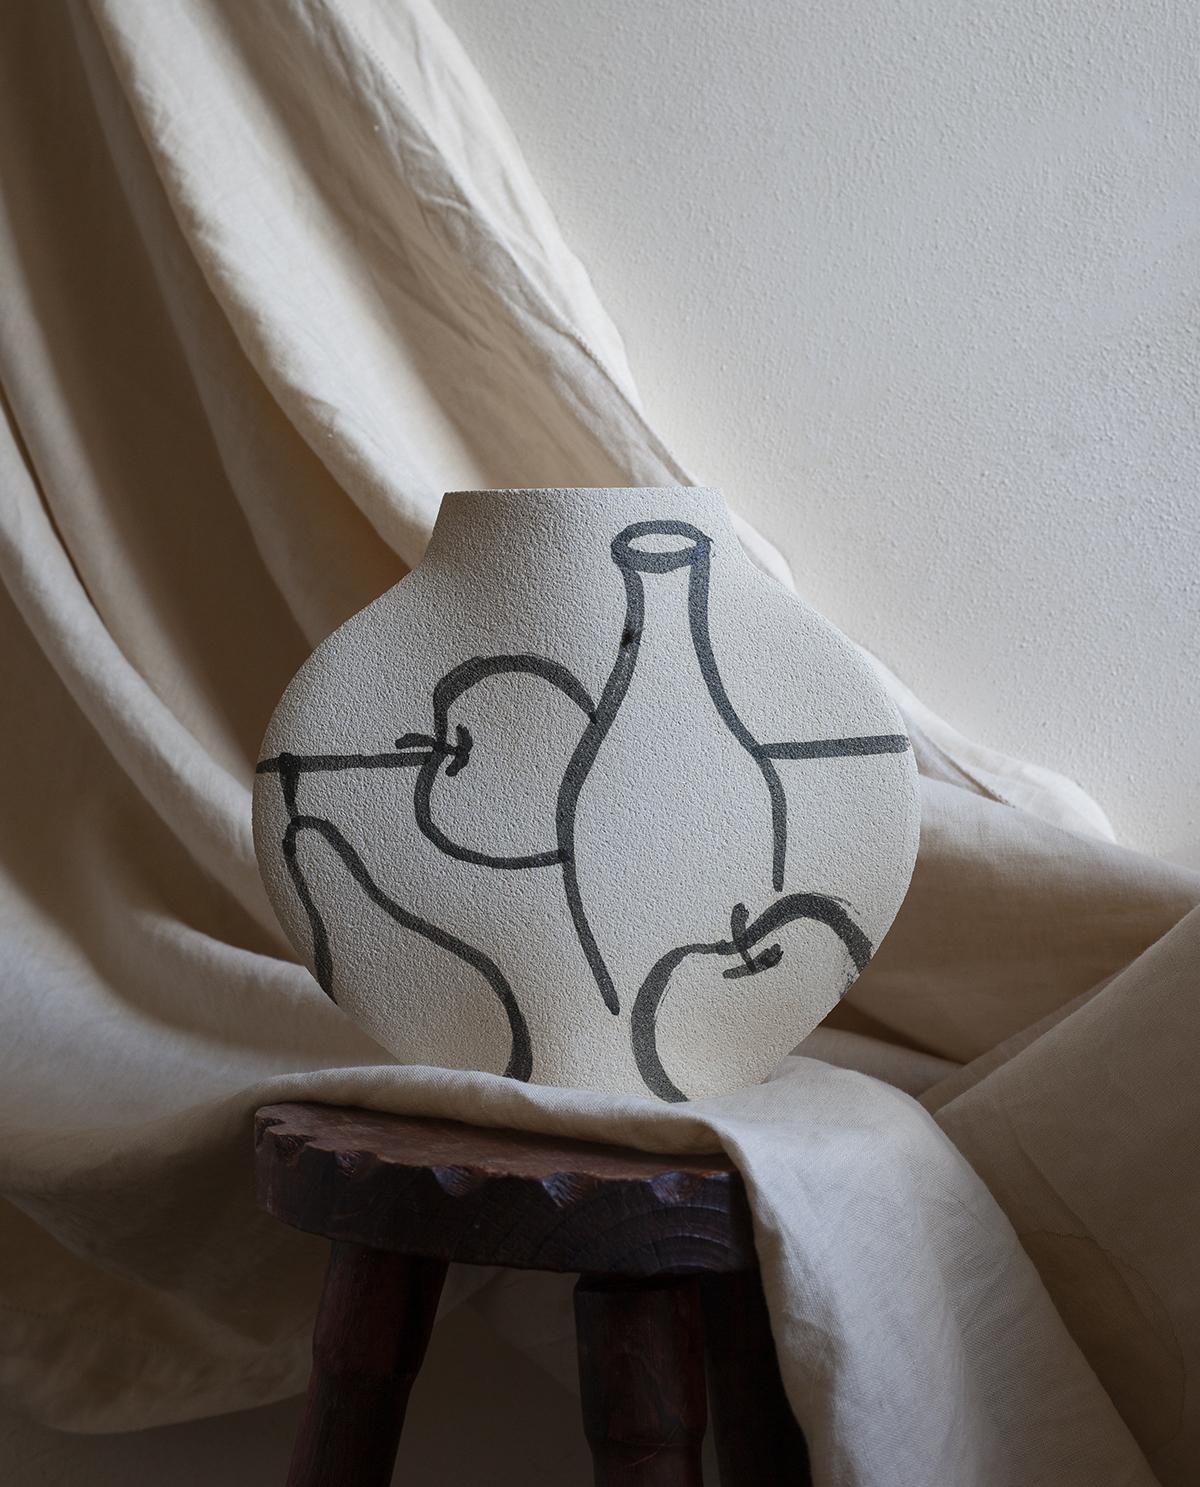 Contemporary 21st Century 'Still Life' Vase in White Ceramic, Handcrafted in France For Sale